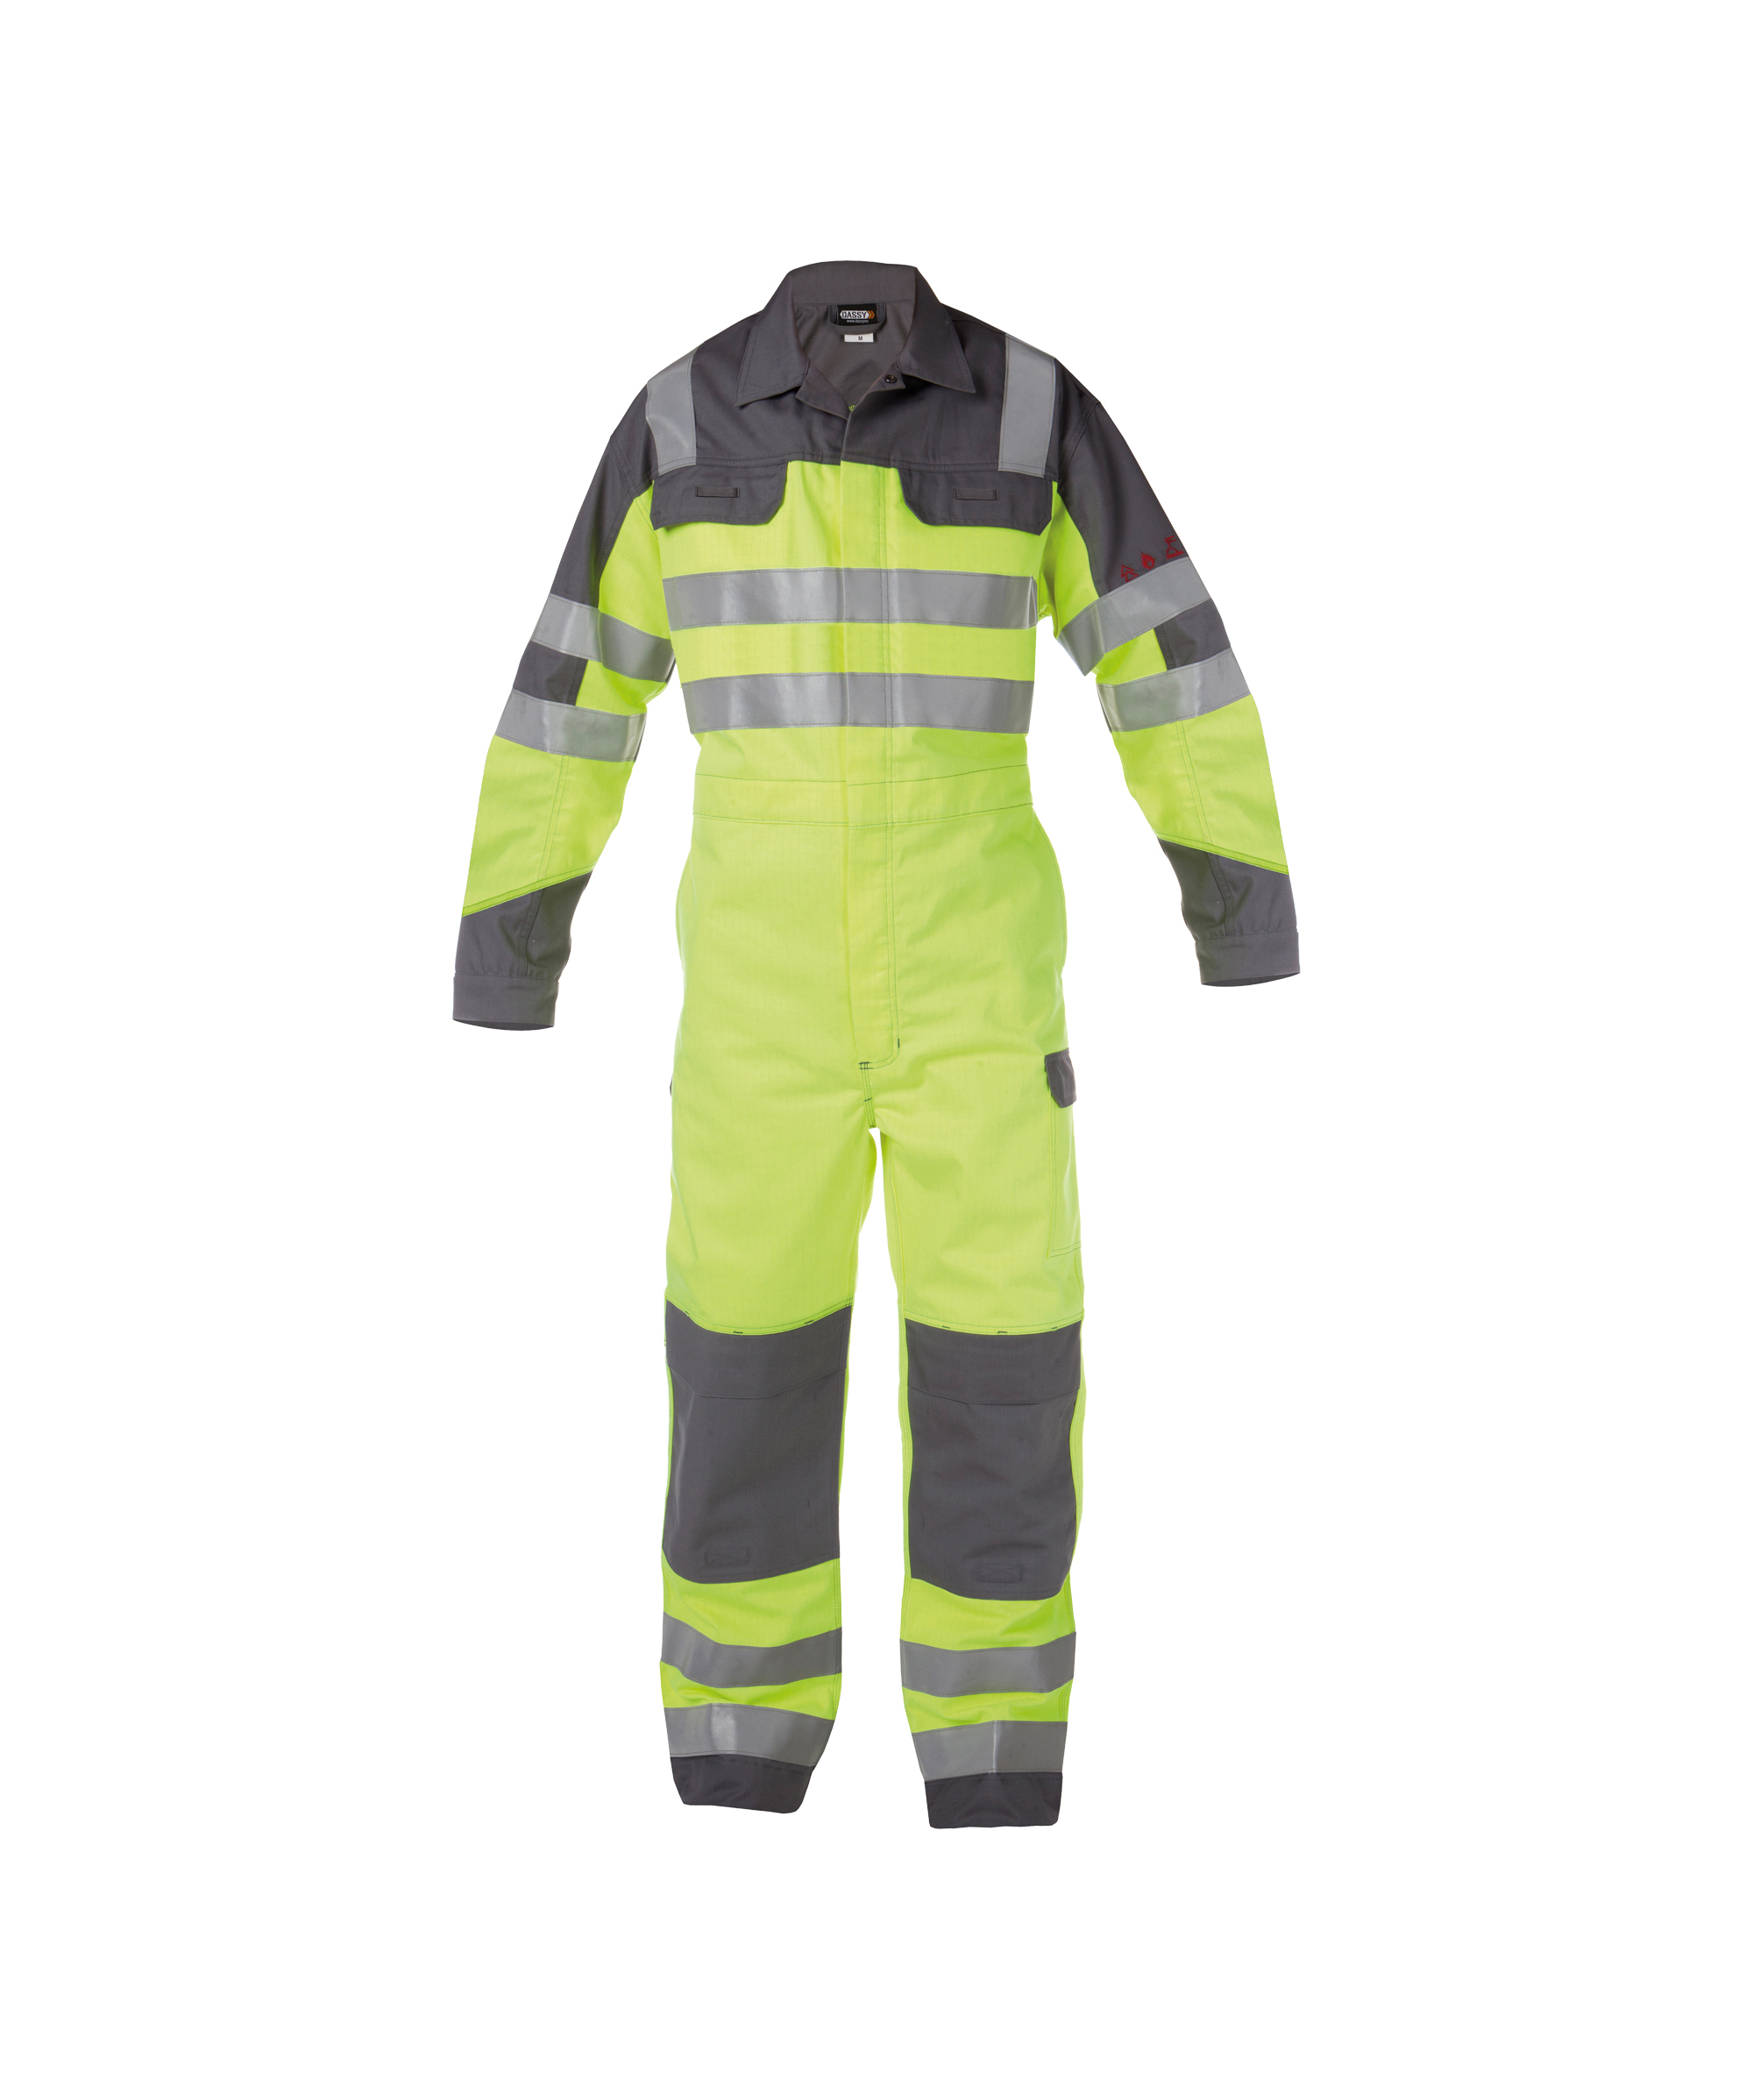 spencer_two-tone-multinorm-high-visibility-overall-with-knee-pockets_fluo-yellow-graphite-grey_front.jpg